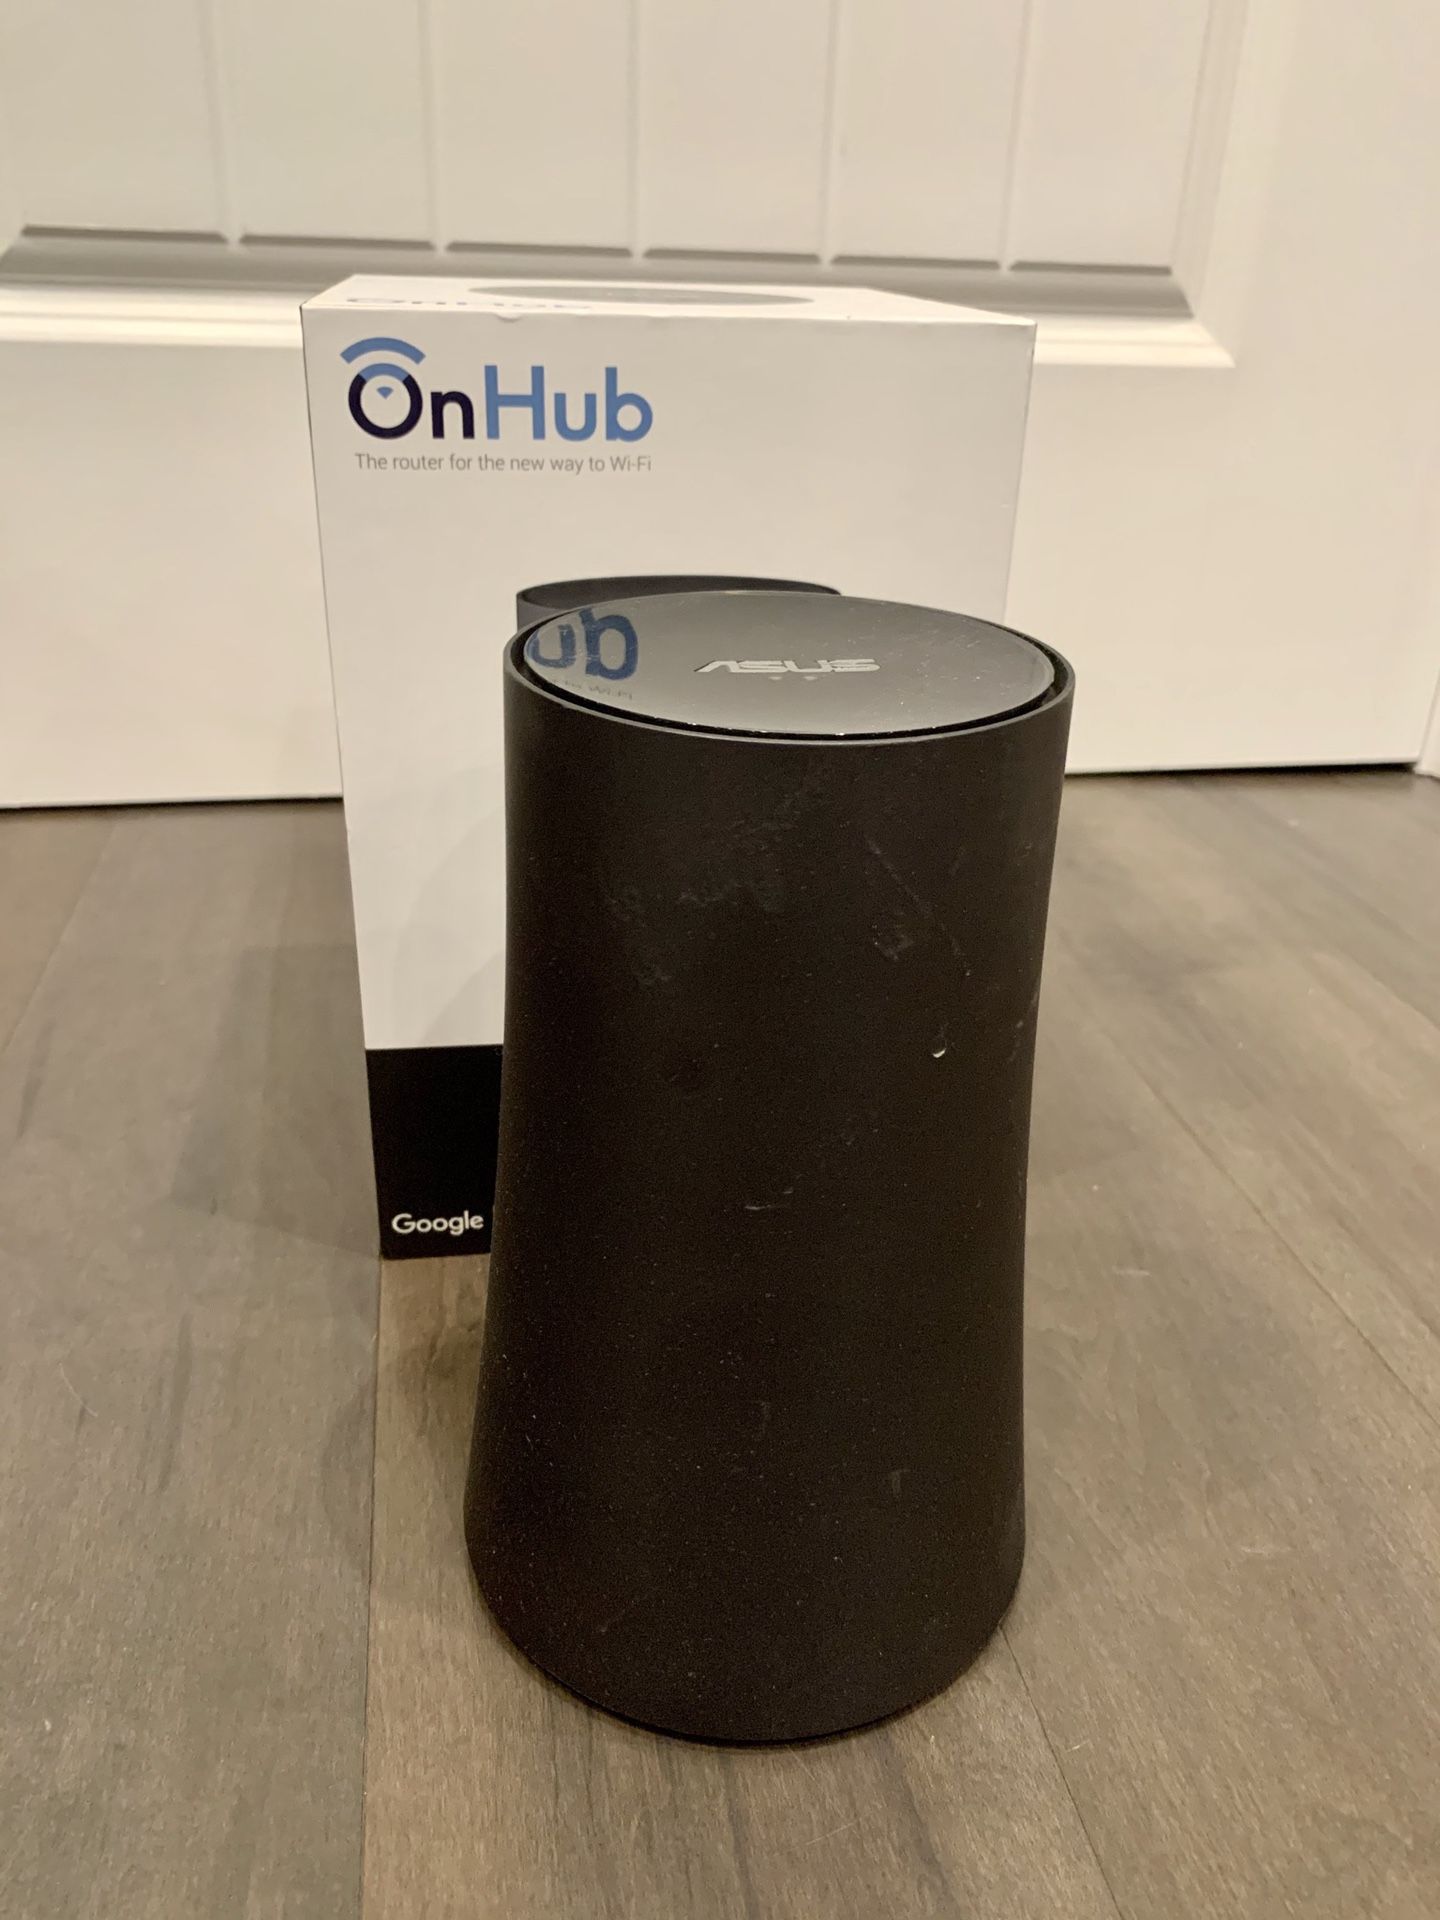 ASUS Google OnHub Wi-Fi Router